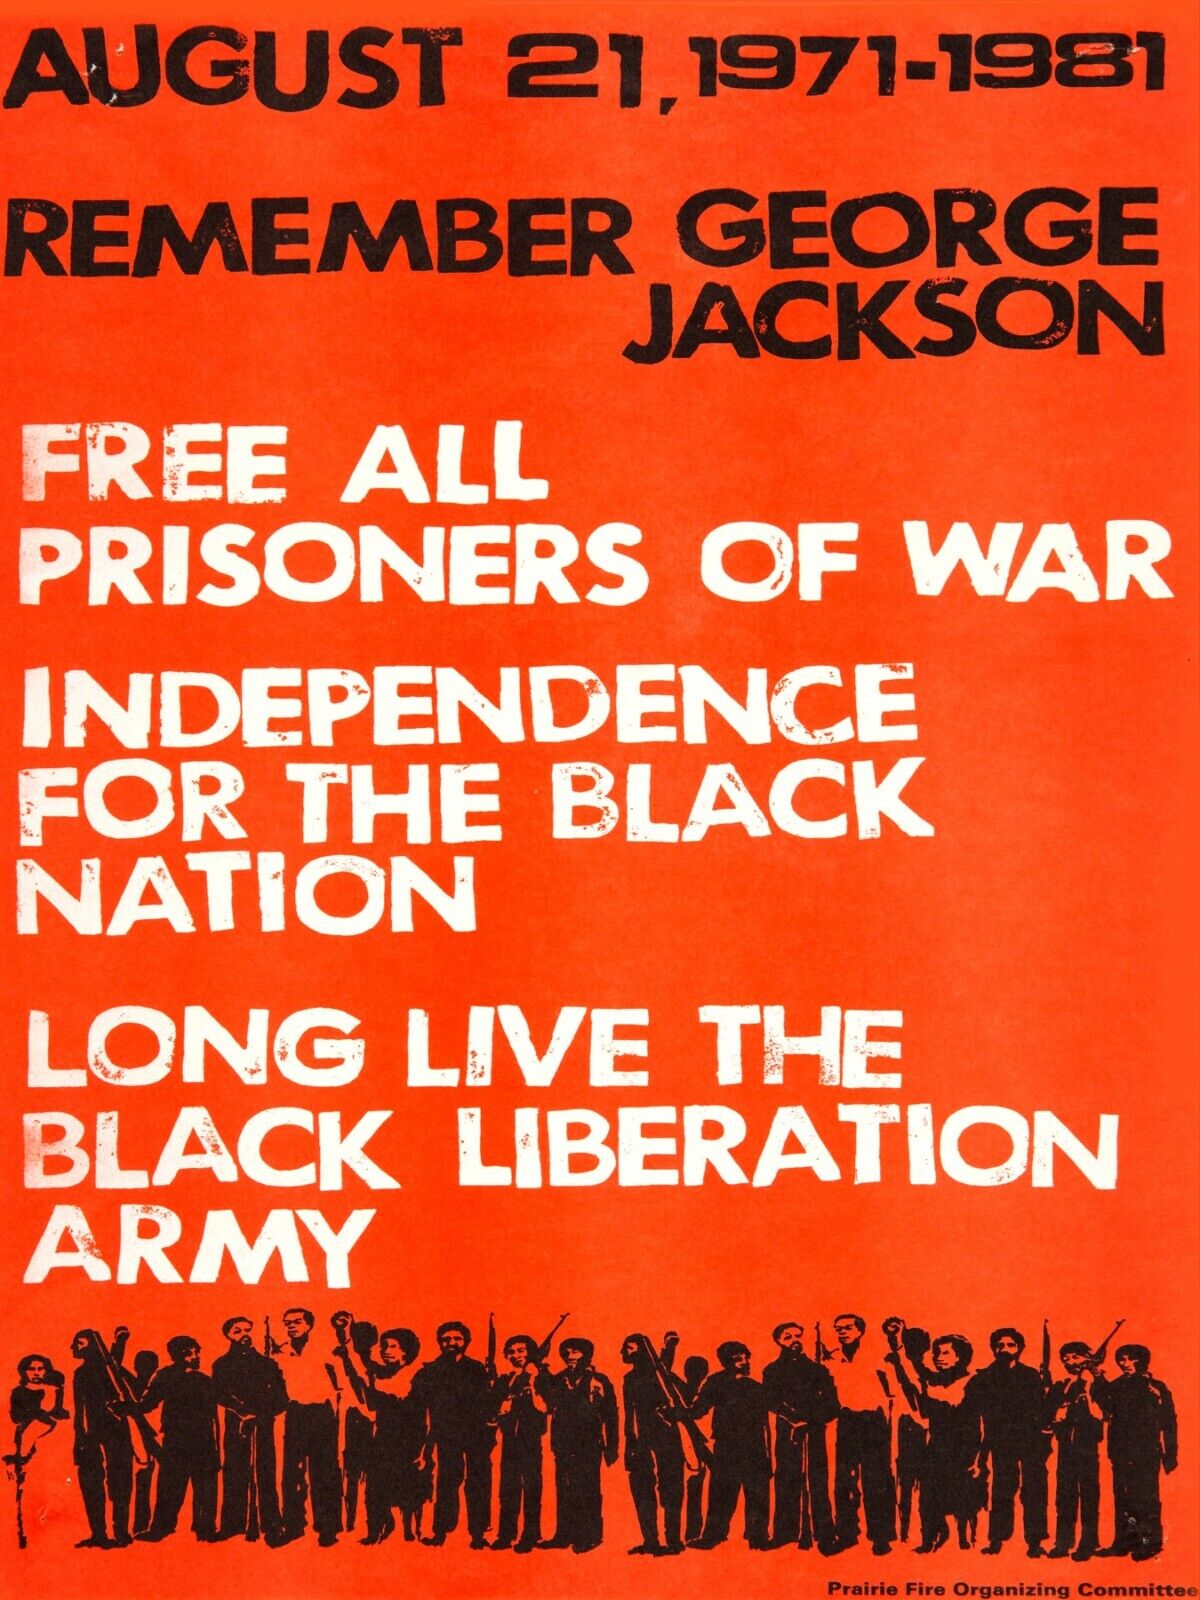 1981 Black Liberation Army NEW METAL SIGN: Remember George Jackson